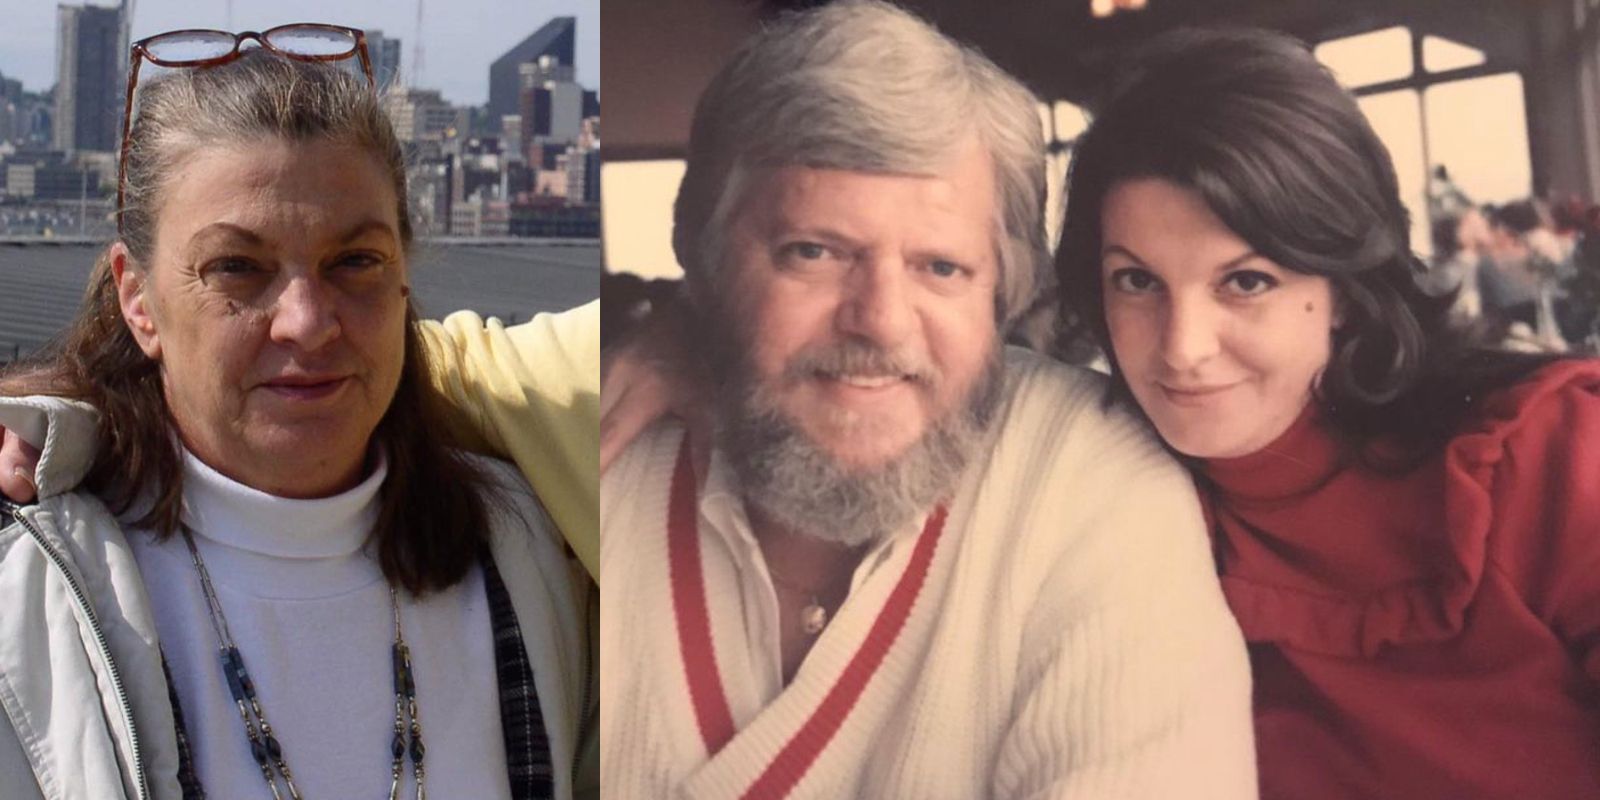 Split image of Debbie from 90 Day Fiancé now with glasses and Debbie in 1990s wearing a red top with late husband 